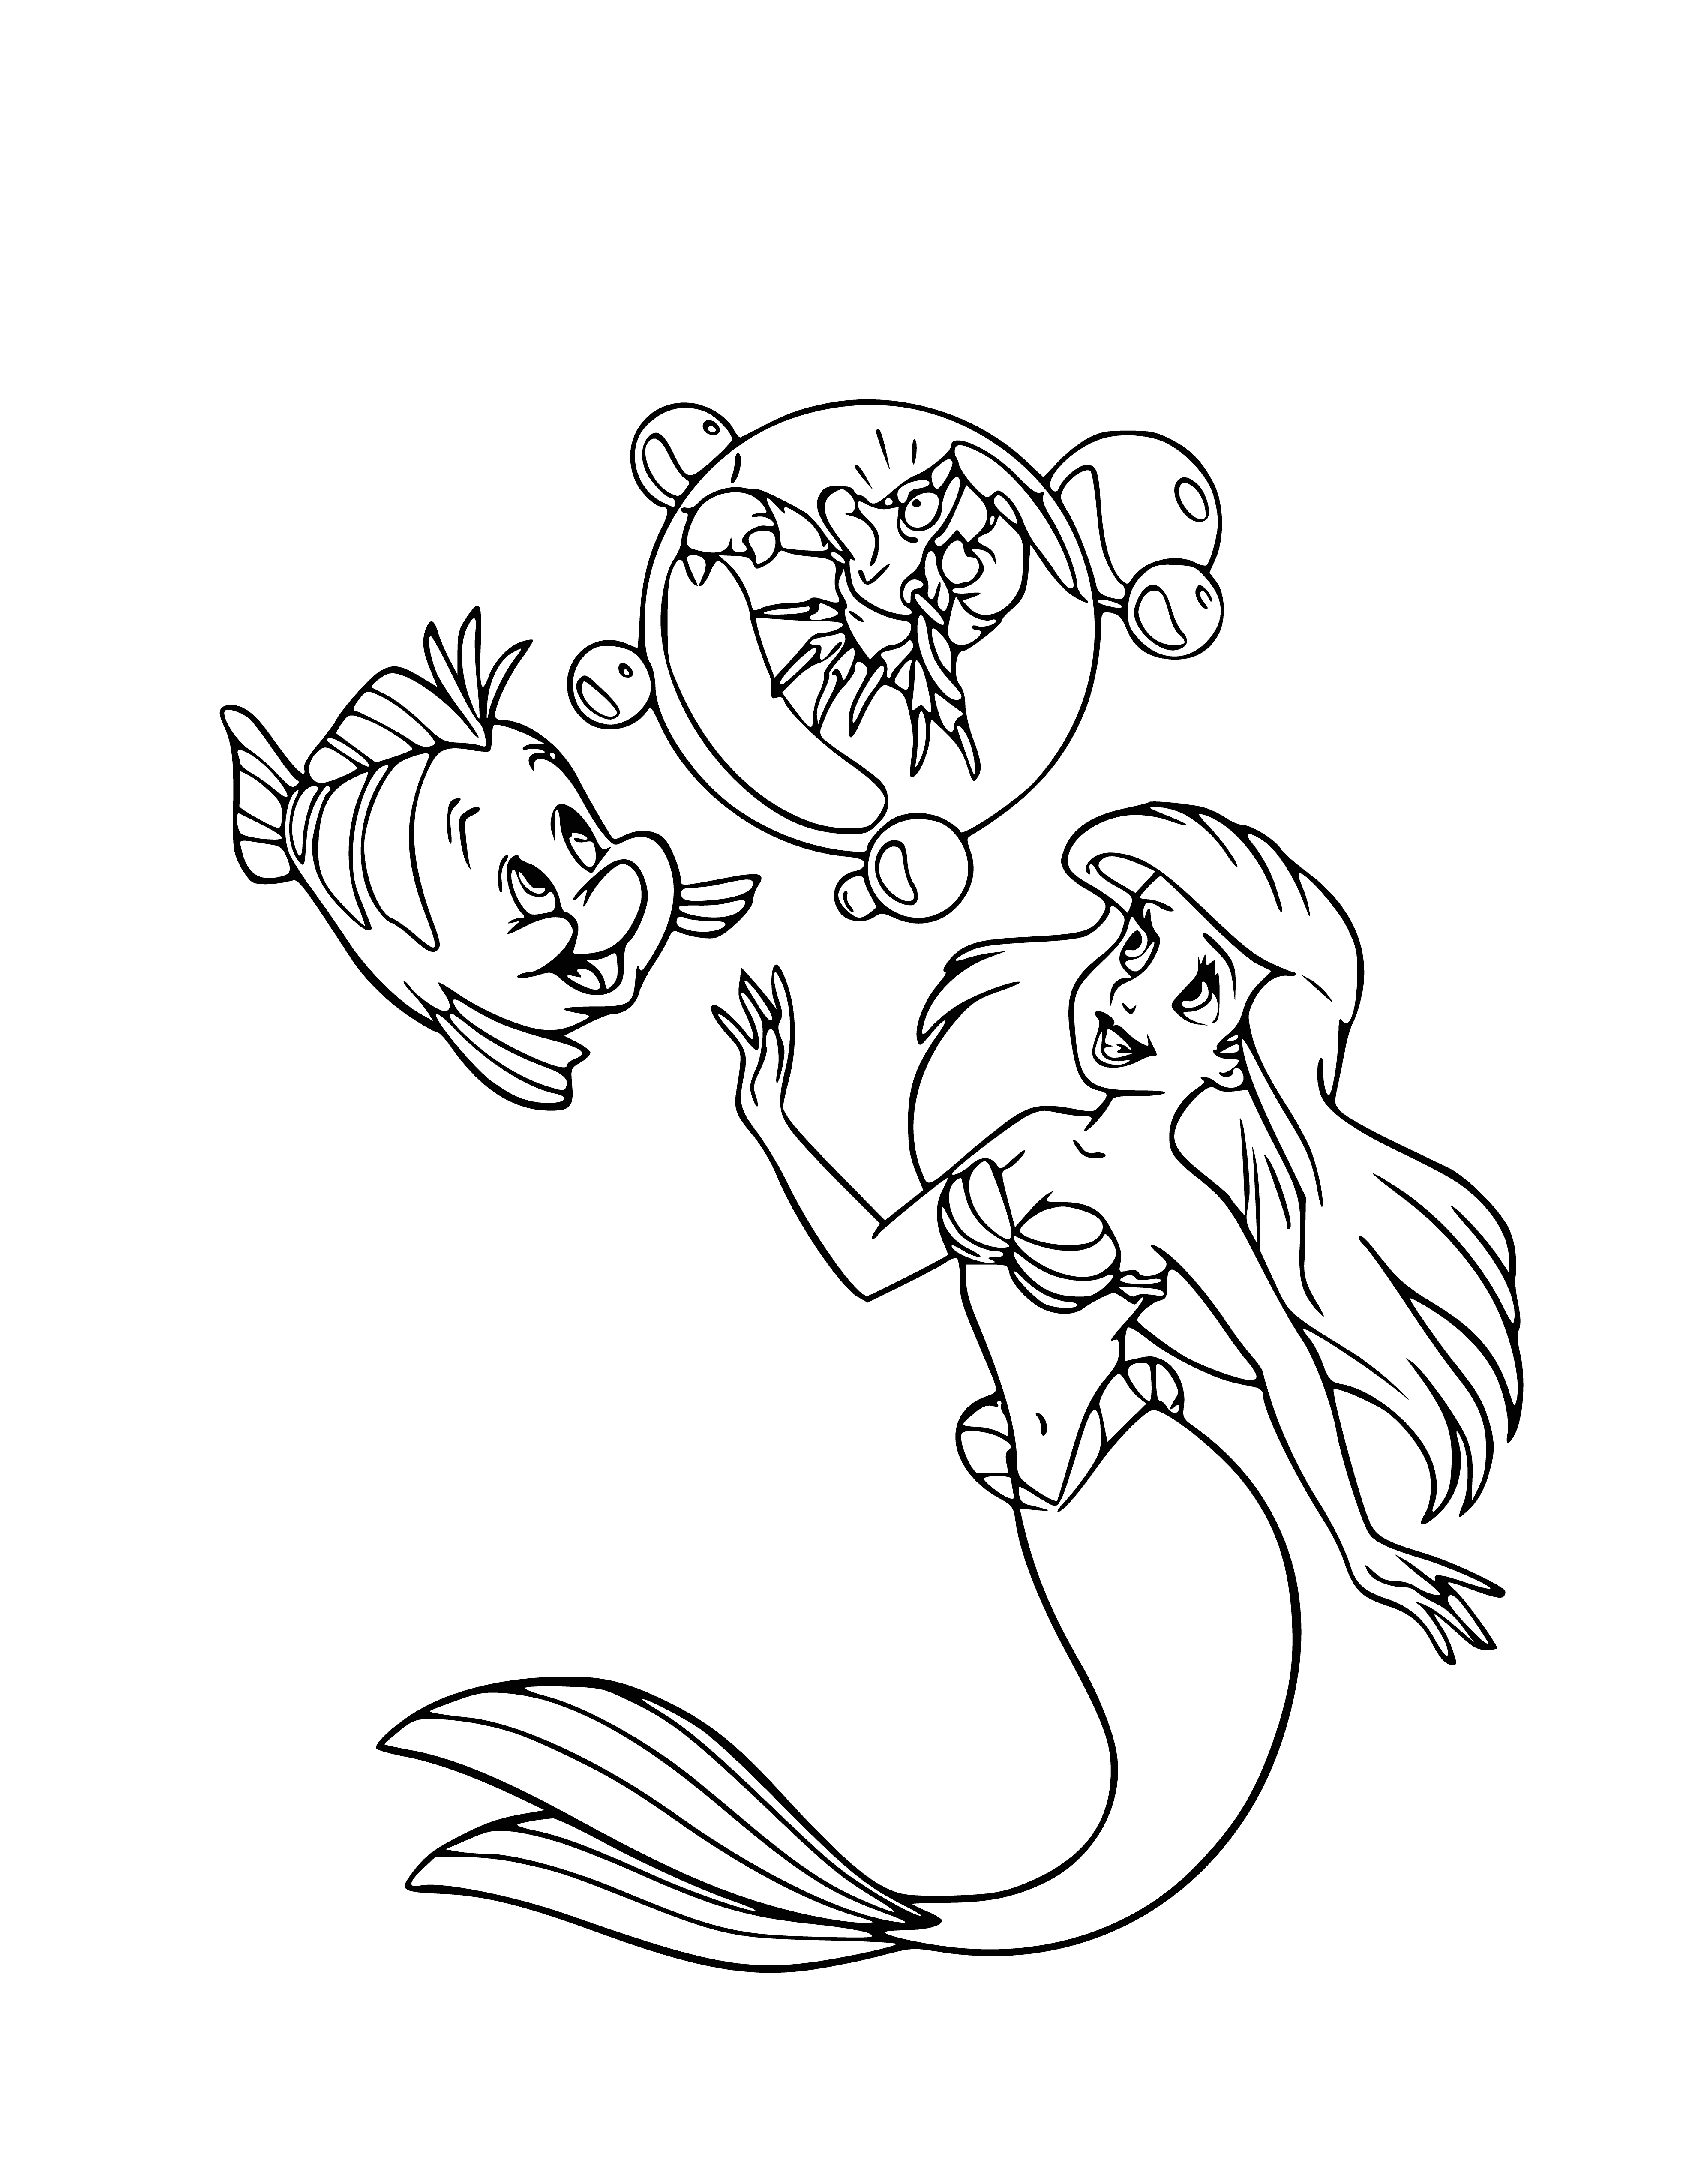 Sebastian in a bubble coloring page